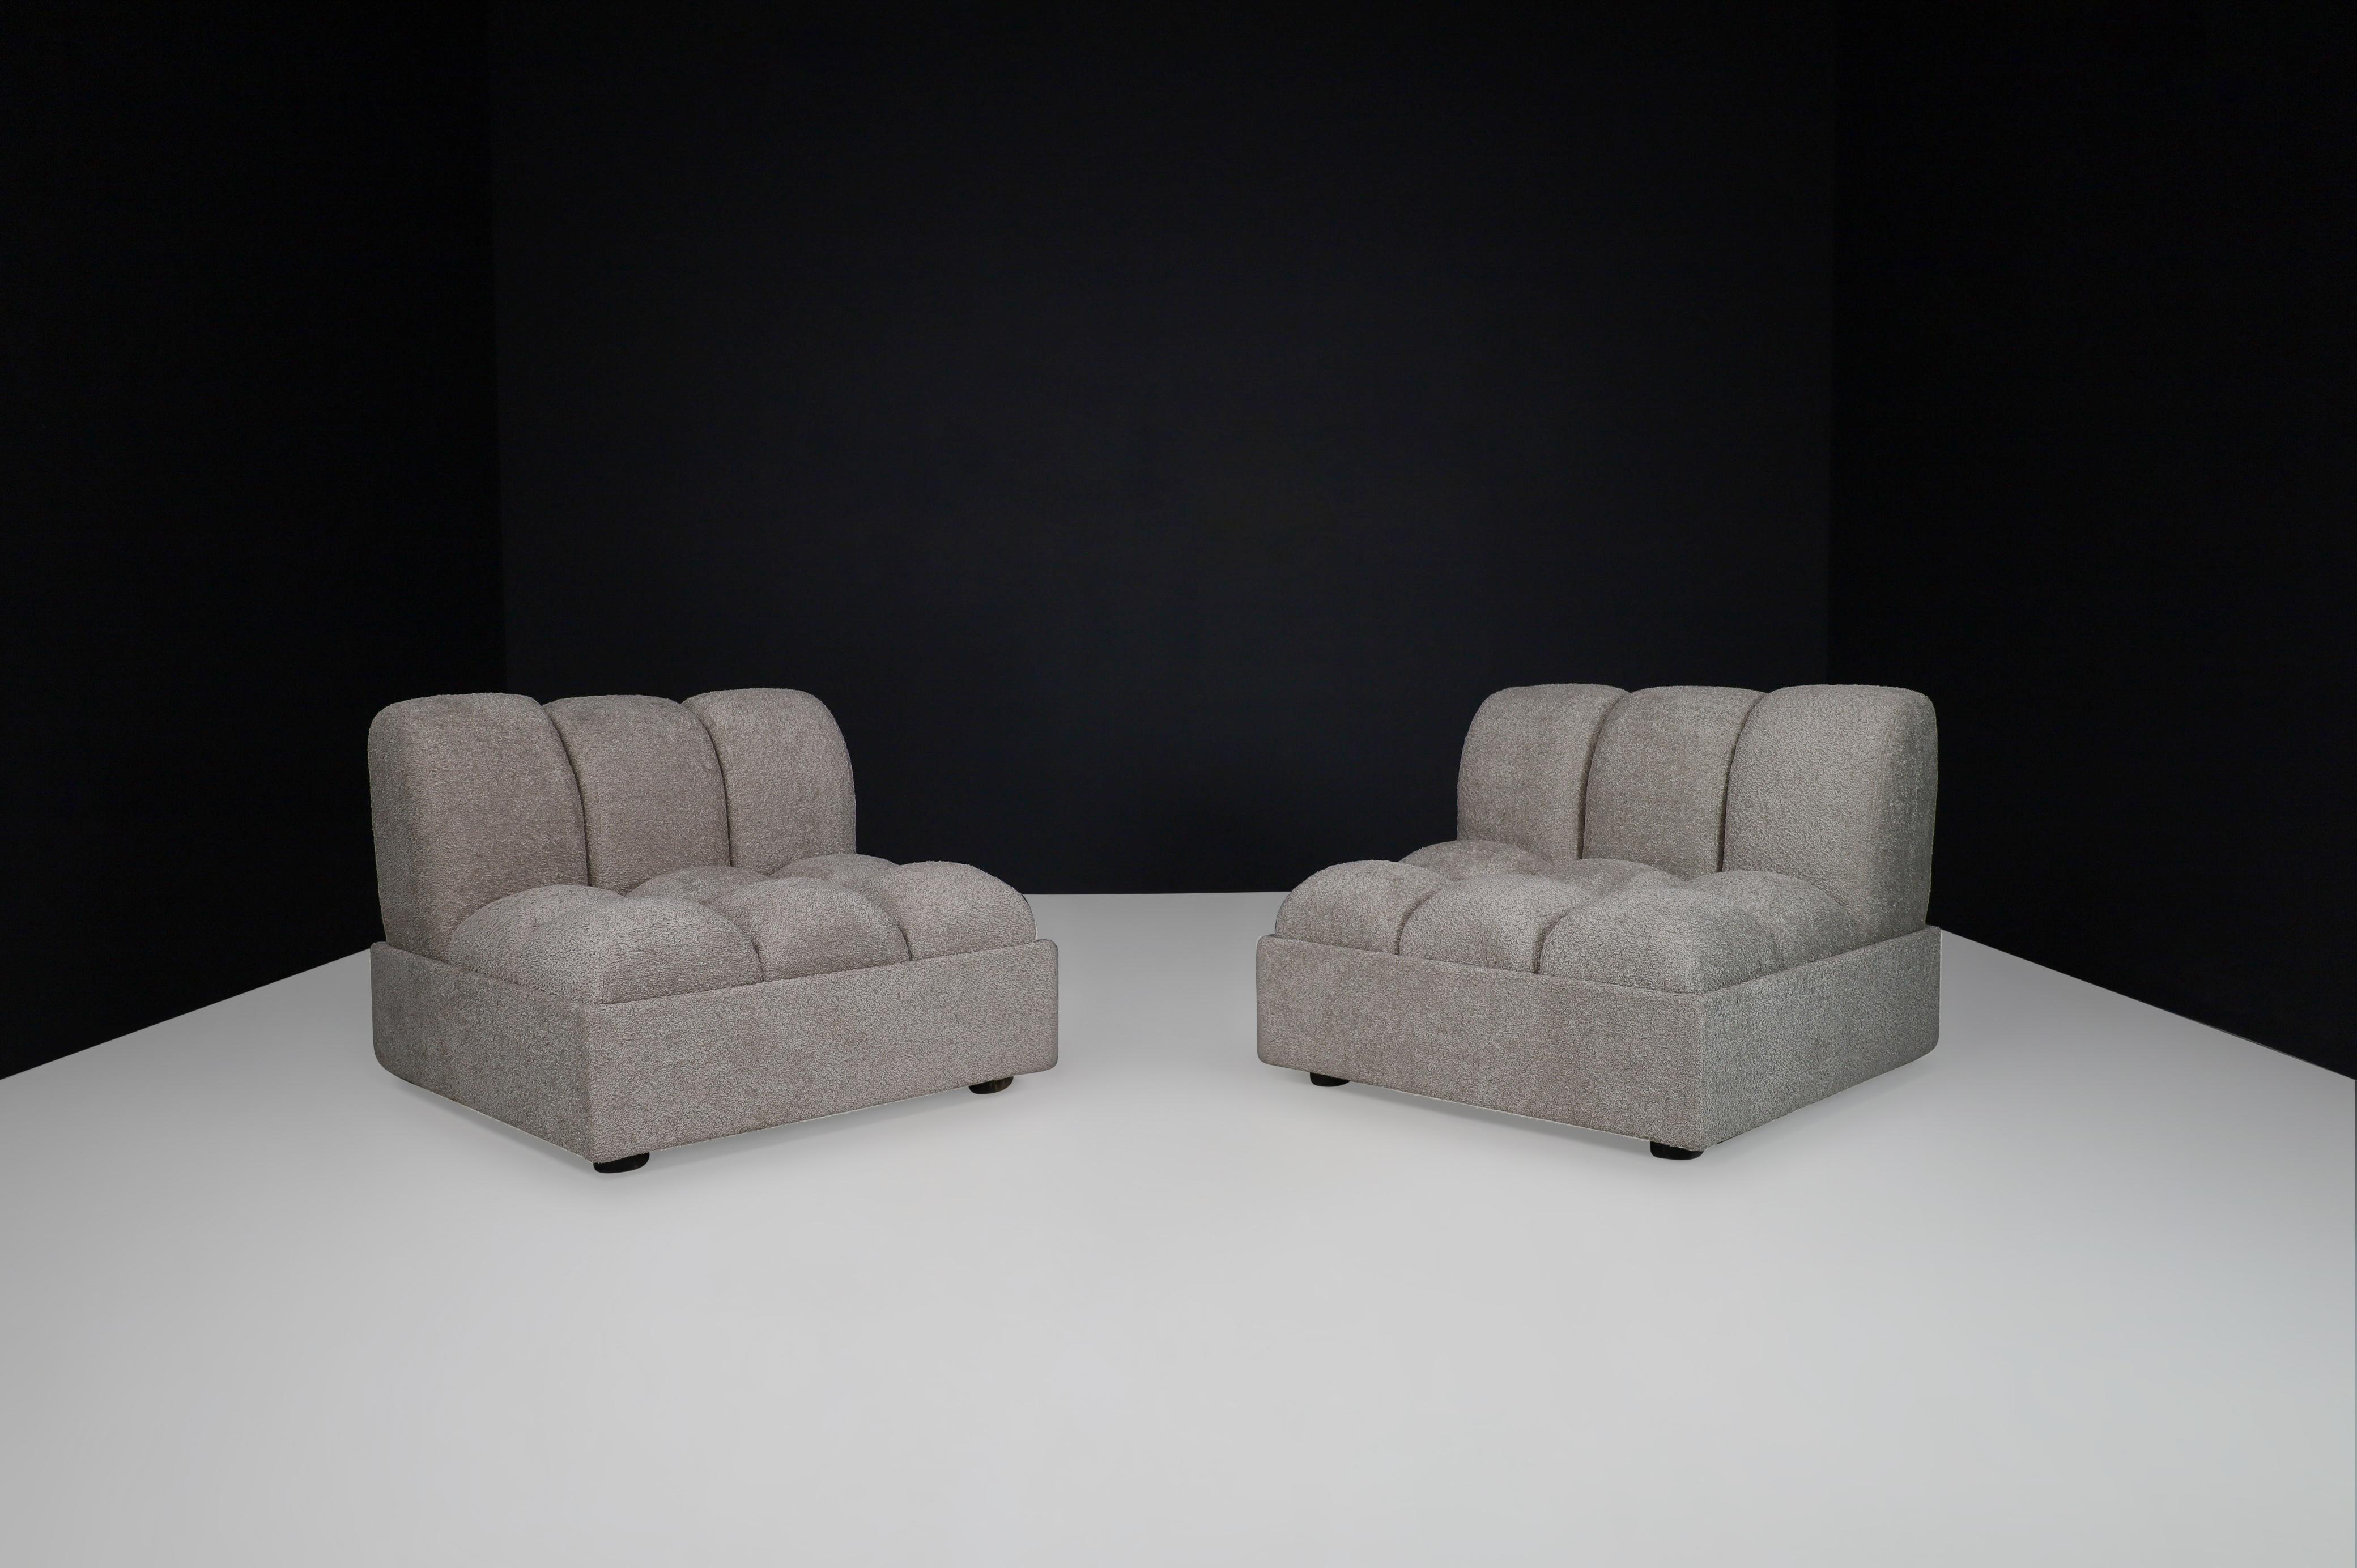 Lounge Chairs or Sectional Sofa in Re-upholstered Fabric, Italy, 1970s For Sale 14